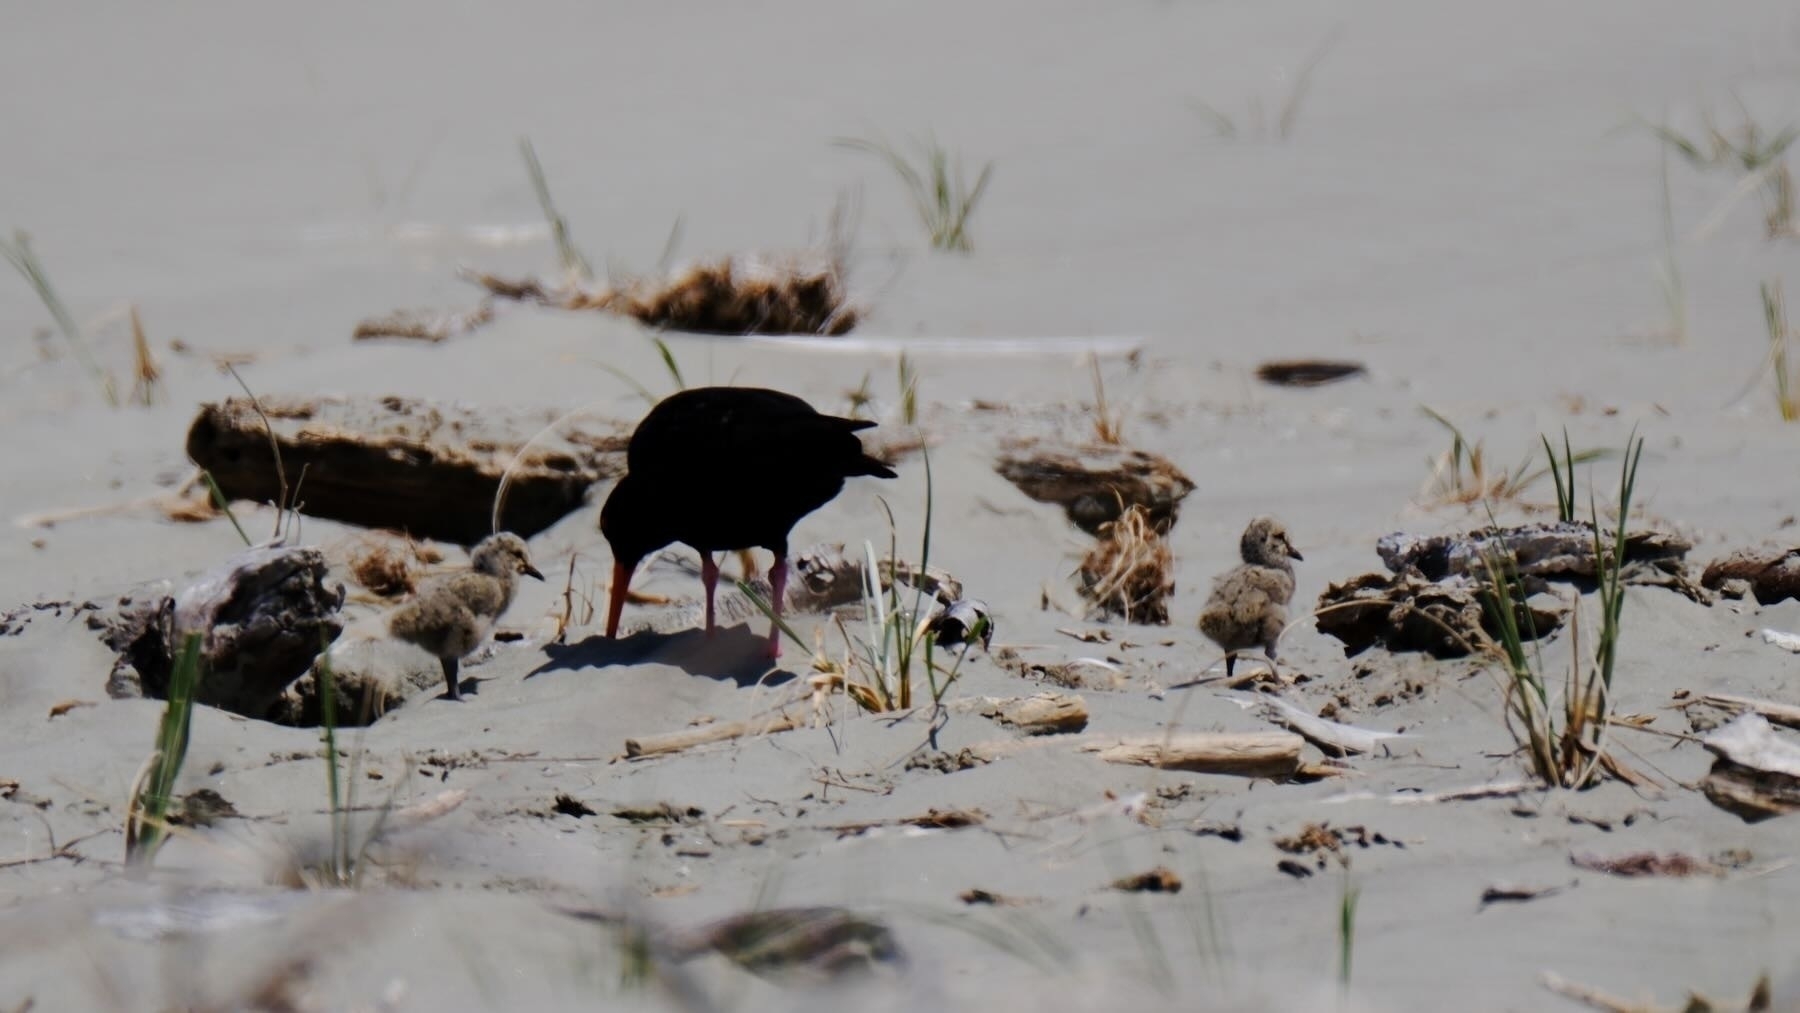 Two Oystercatcher chicks near an adult amongst driftwood, sand and young grasses. 